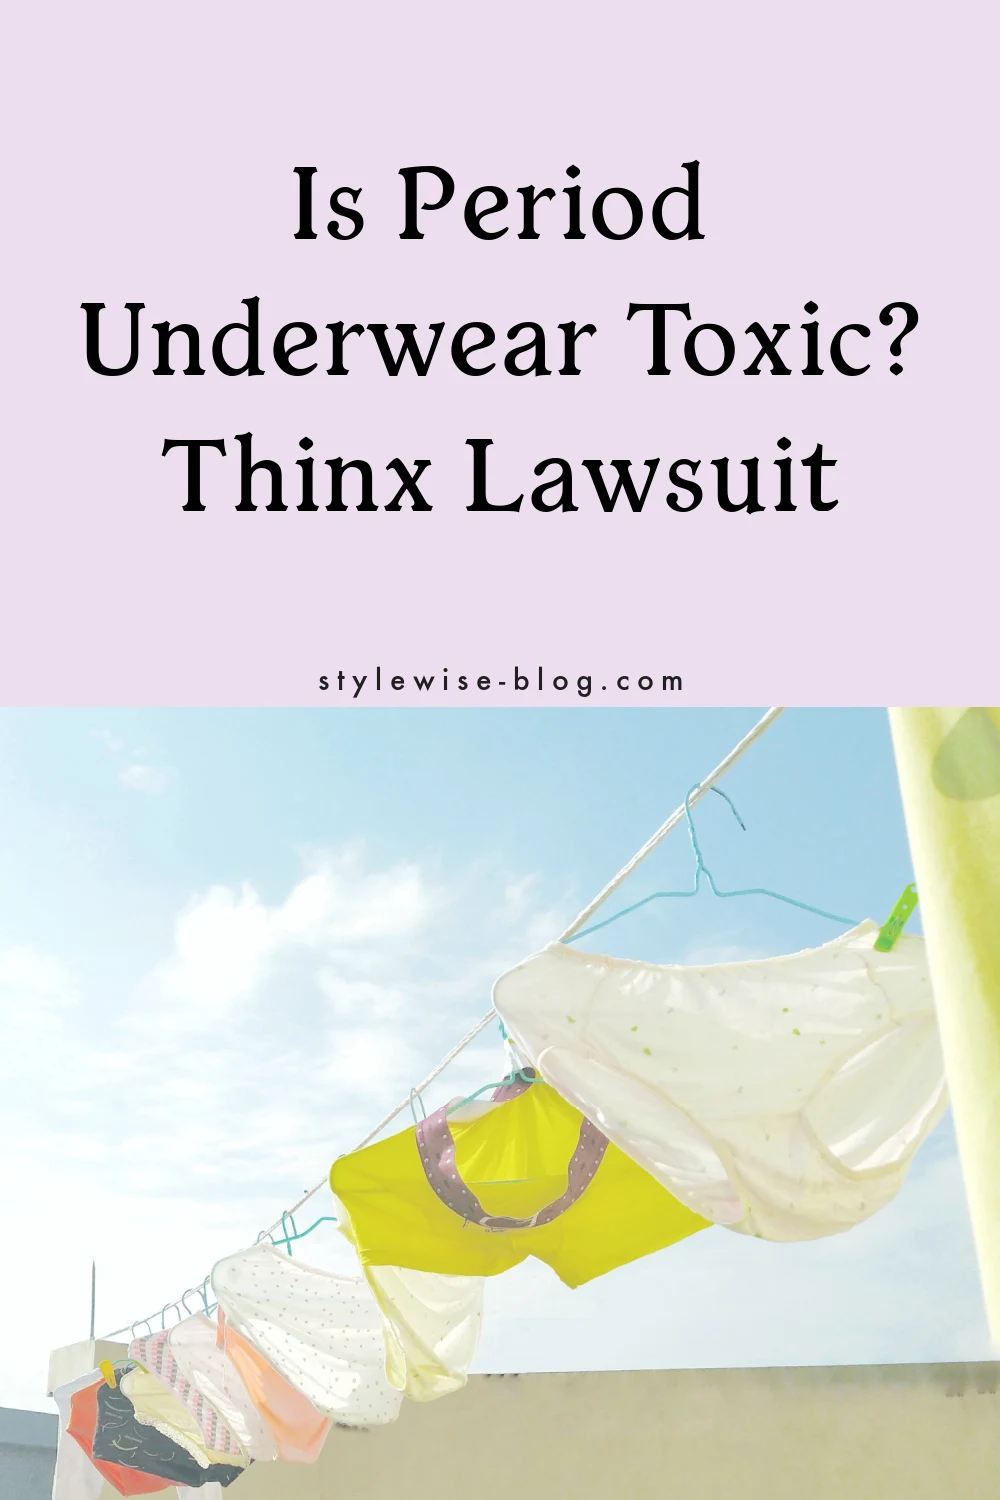 graphic with lilac background that reads "Is period underwear toxic? Thinx lawsuit" with image of underwear on clothesline